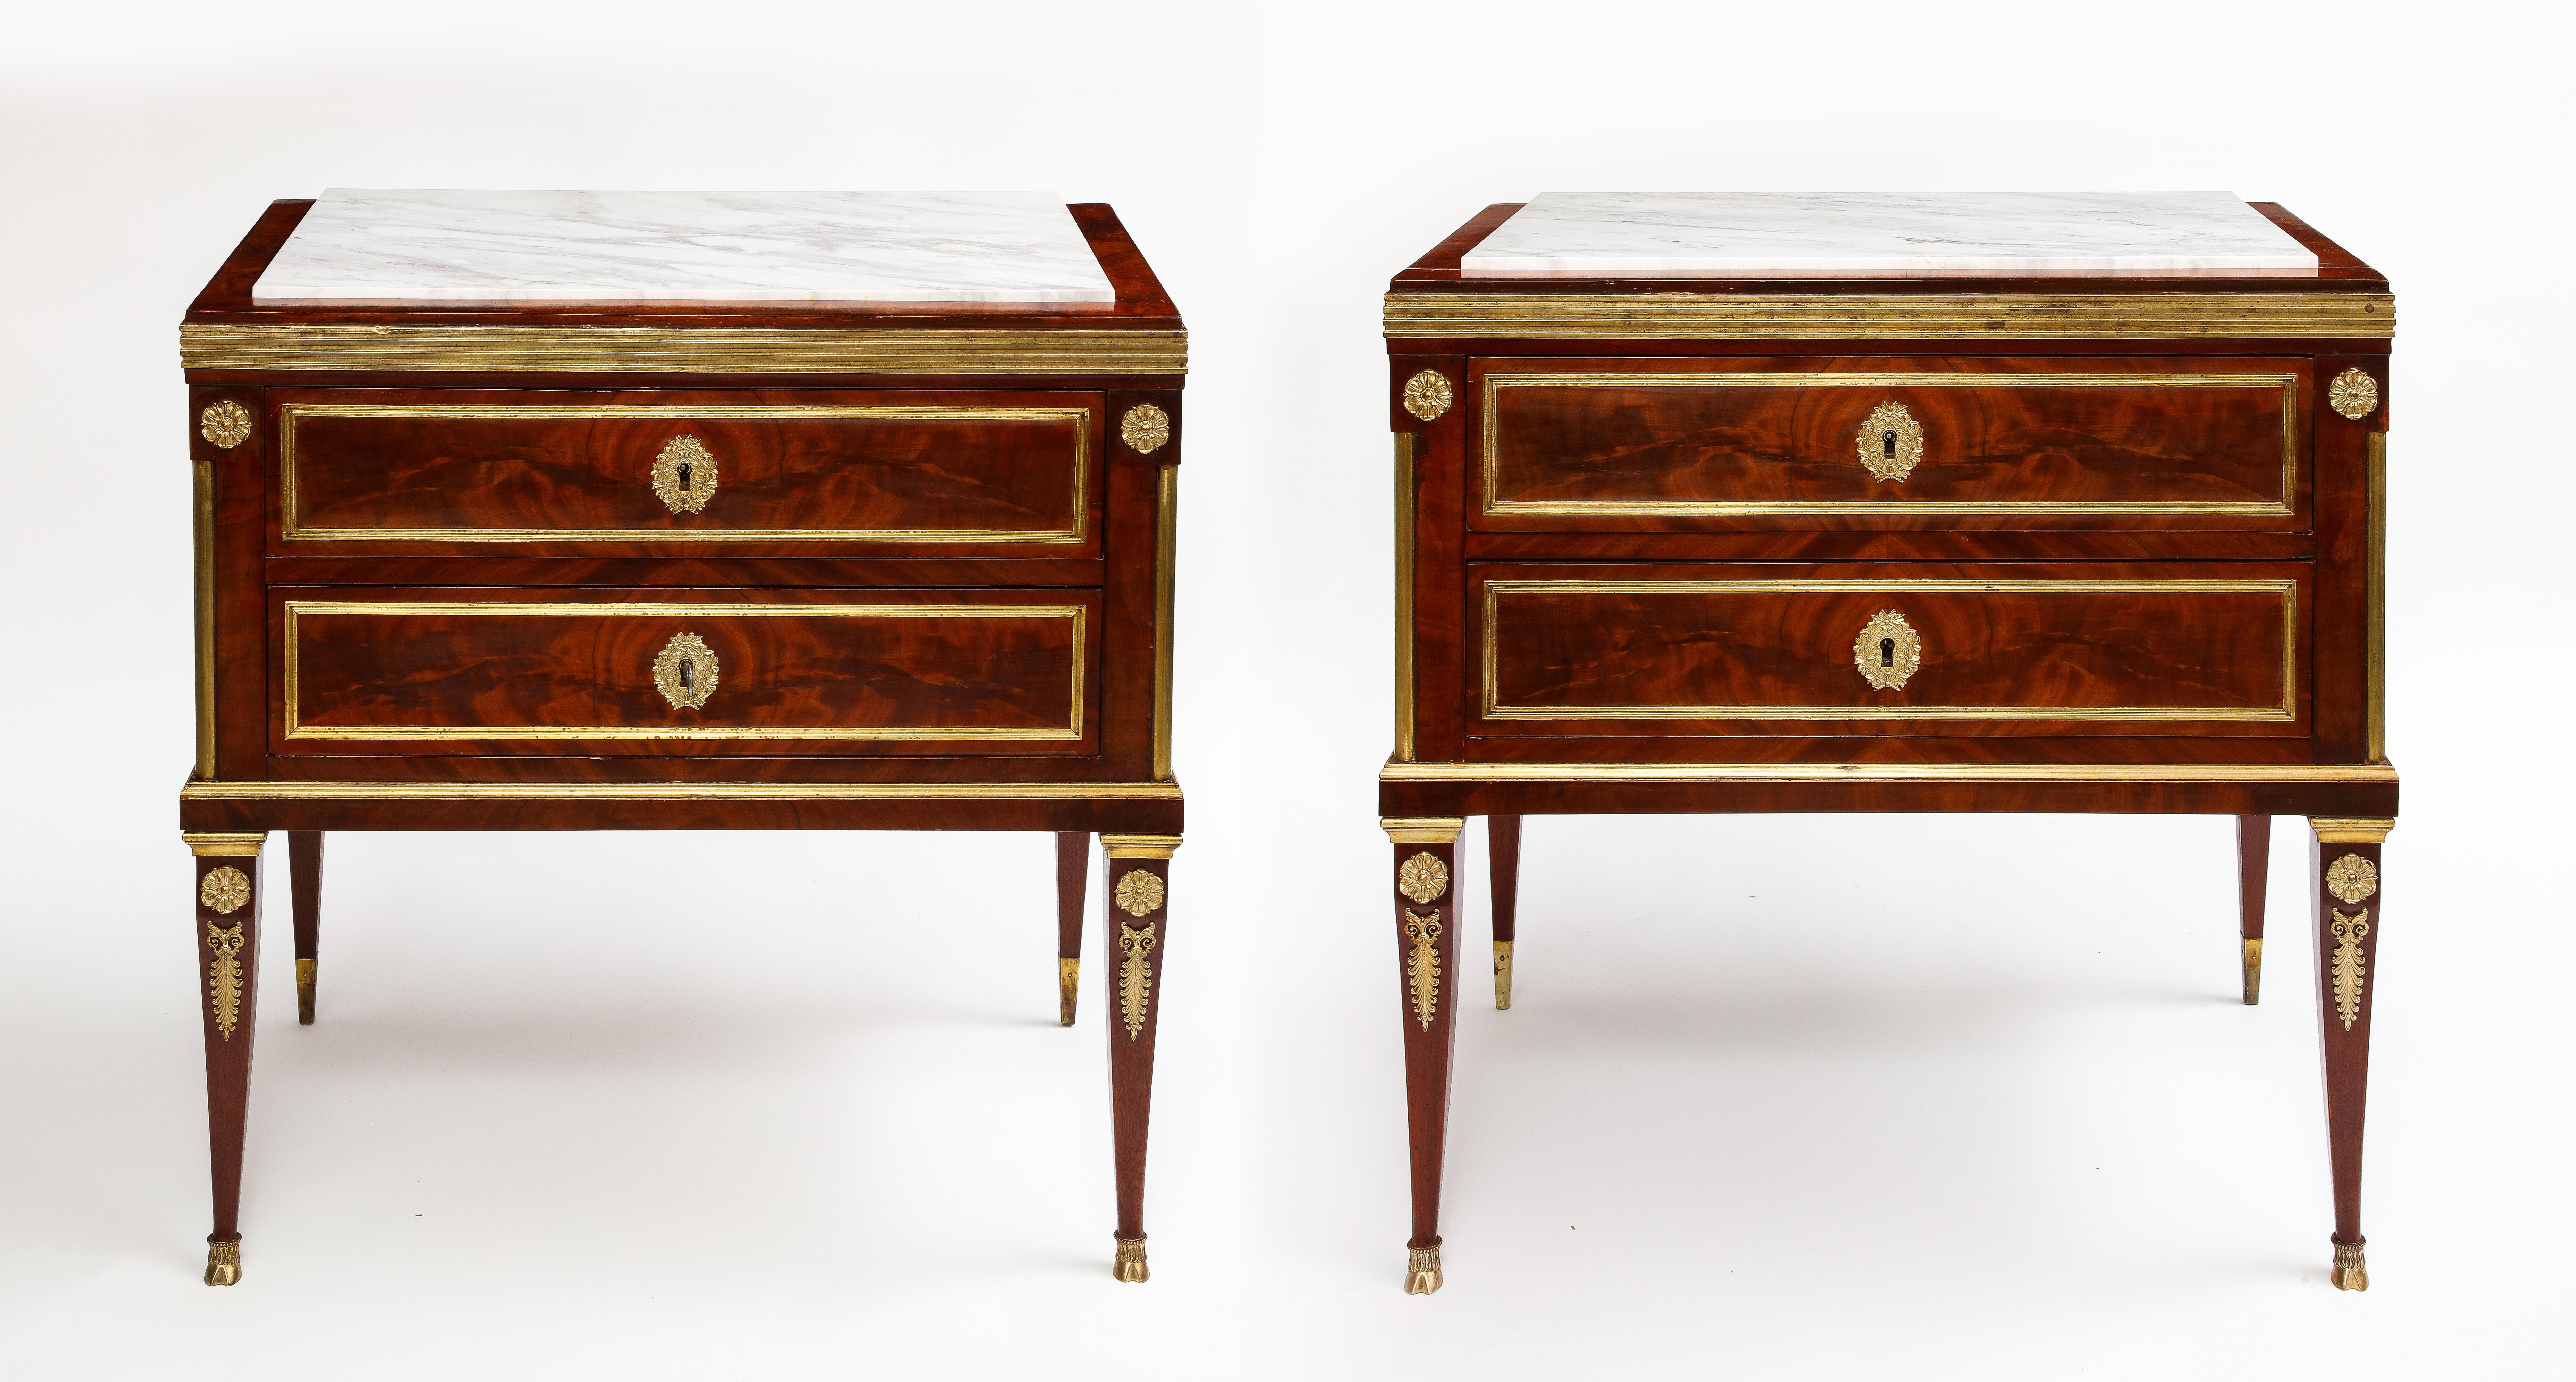 A Pair of Early 1800's Russian Neoclassical/Empire Ormolu Mounted Carrara Marble Top Mahogany Side Tables/Bed side cabinets

Presenting a magnificent pair of museum-quality side tables, exquisitely crafted during the Early 1800's. These stunning